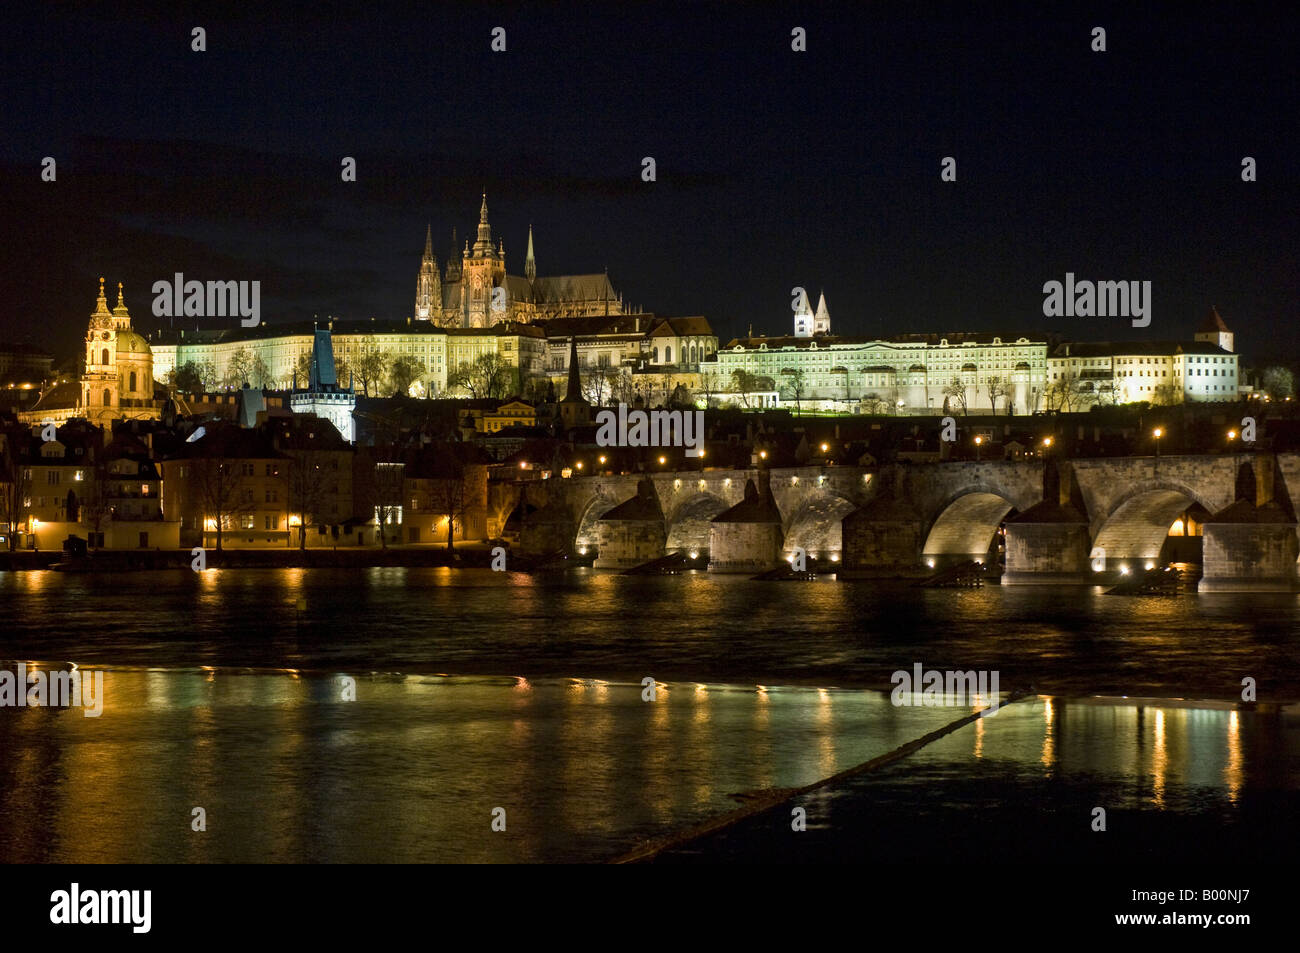 A night view of Saint Vitus's Cathedral located within the grounds of Prague Castle and the Charles Bridge in the foreground. Stock Photo